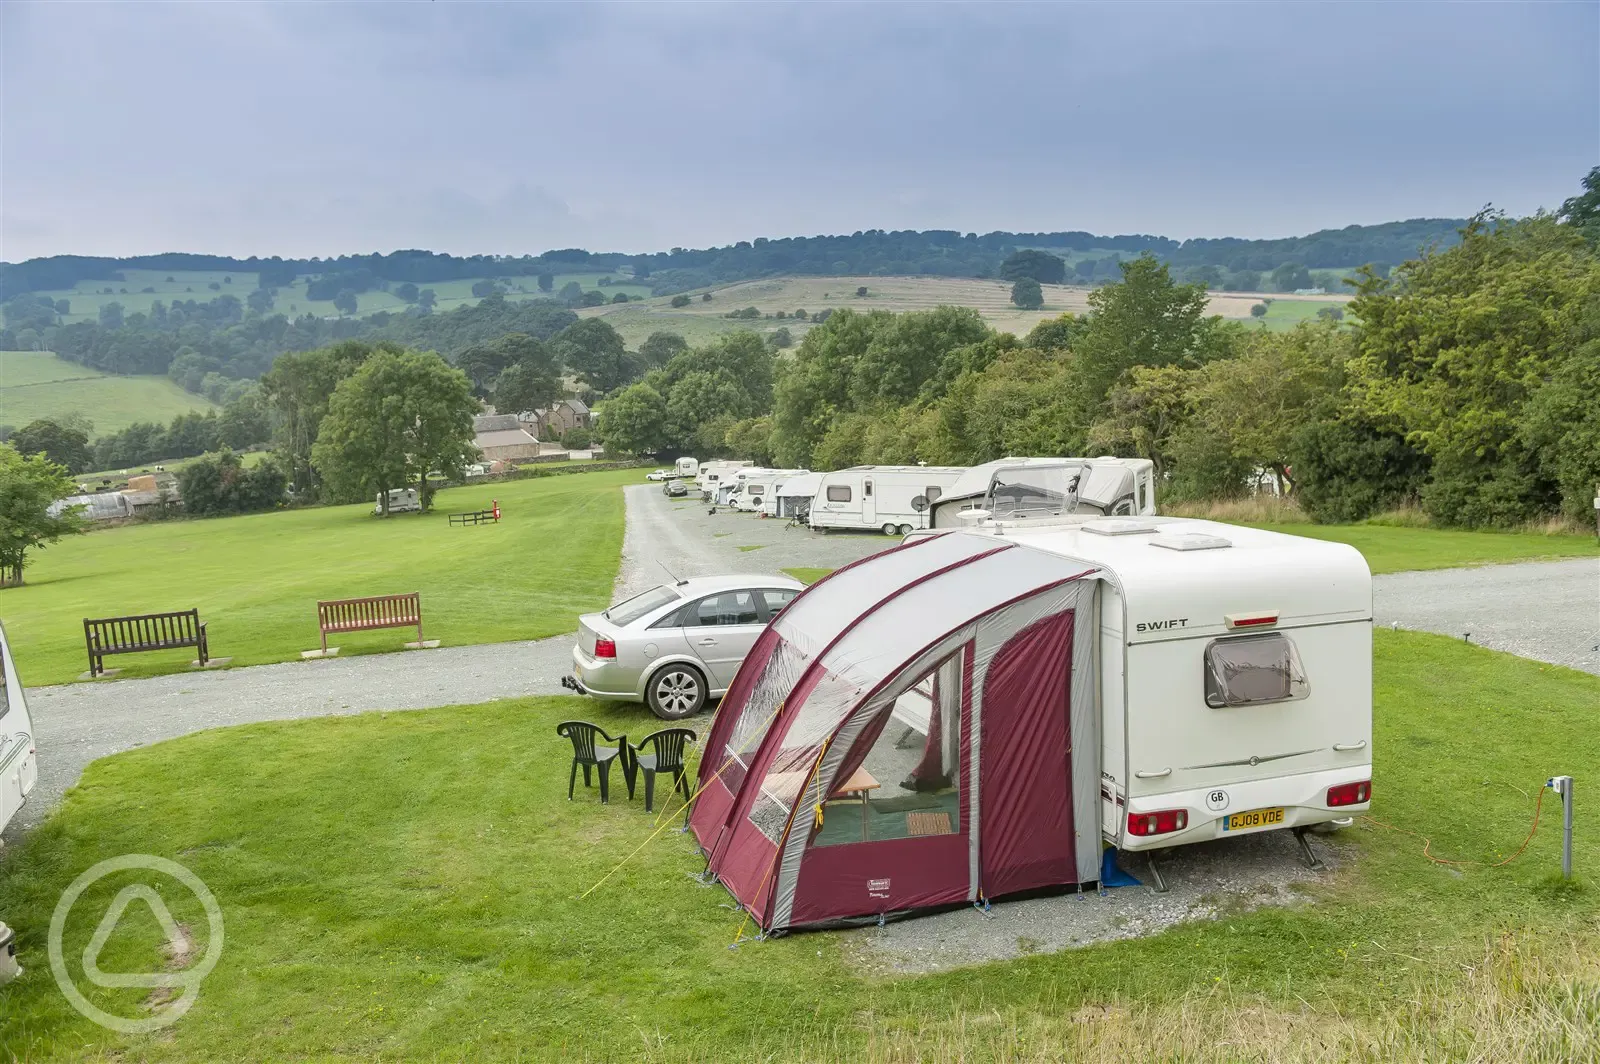 Units pitched at Bakewell Club Campsite